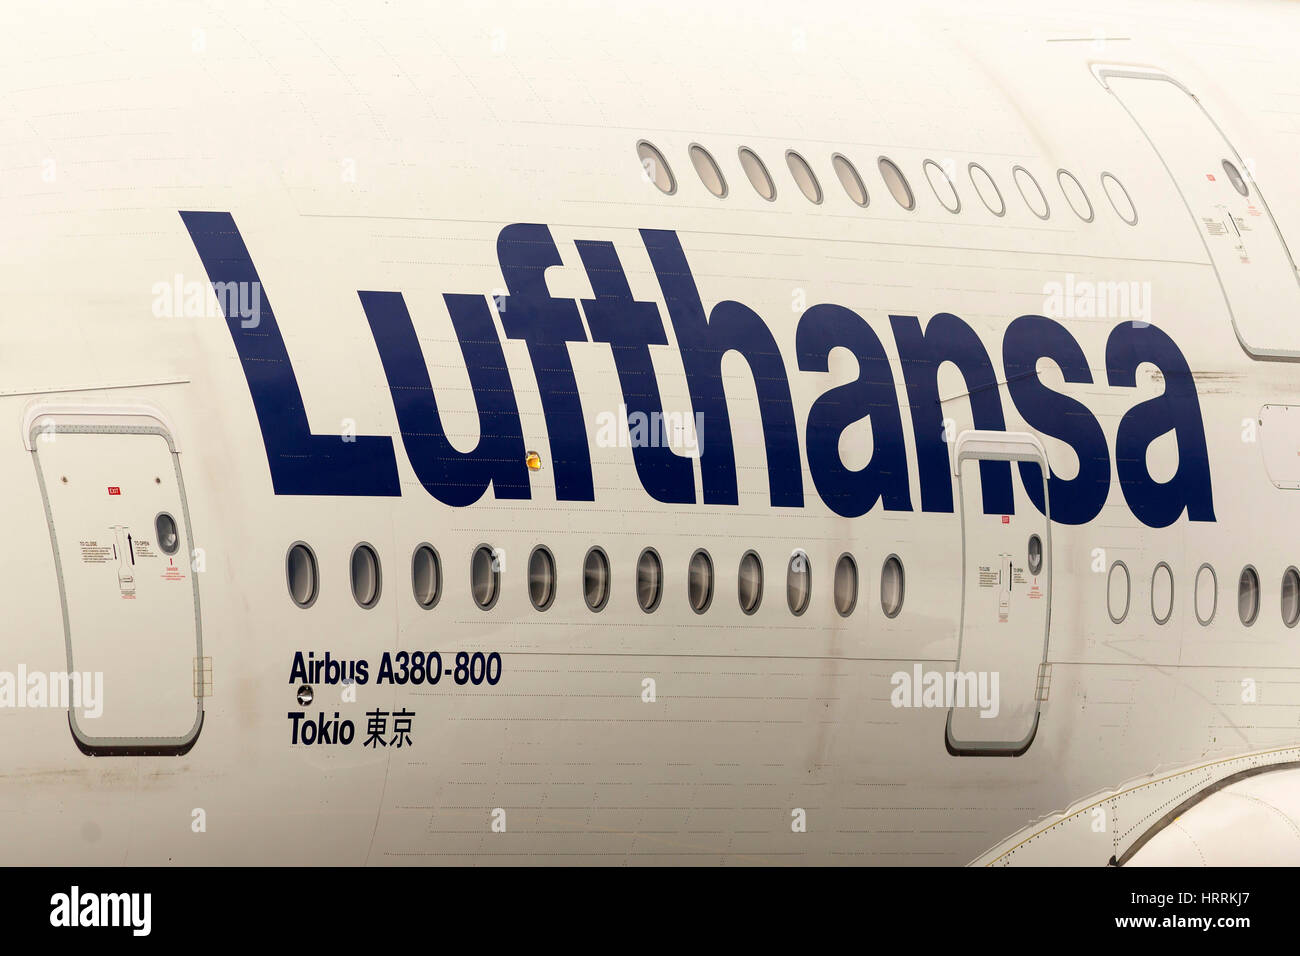 Sofia, Bulgaria - October 16, 2016: Largest passenger aircraft Airbus A380 is seen on Sofia's airport track after landing. Lufthansa logo. Stock Photo